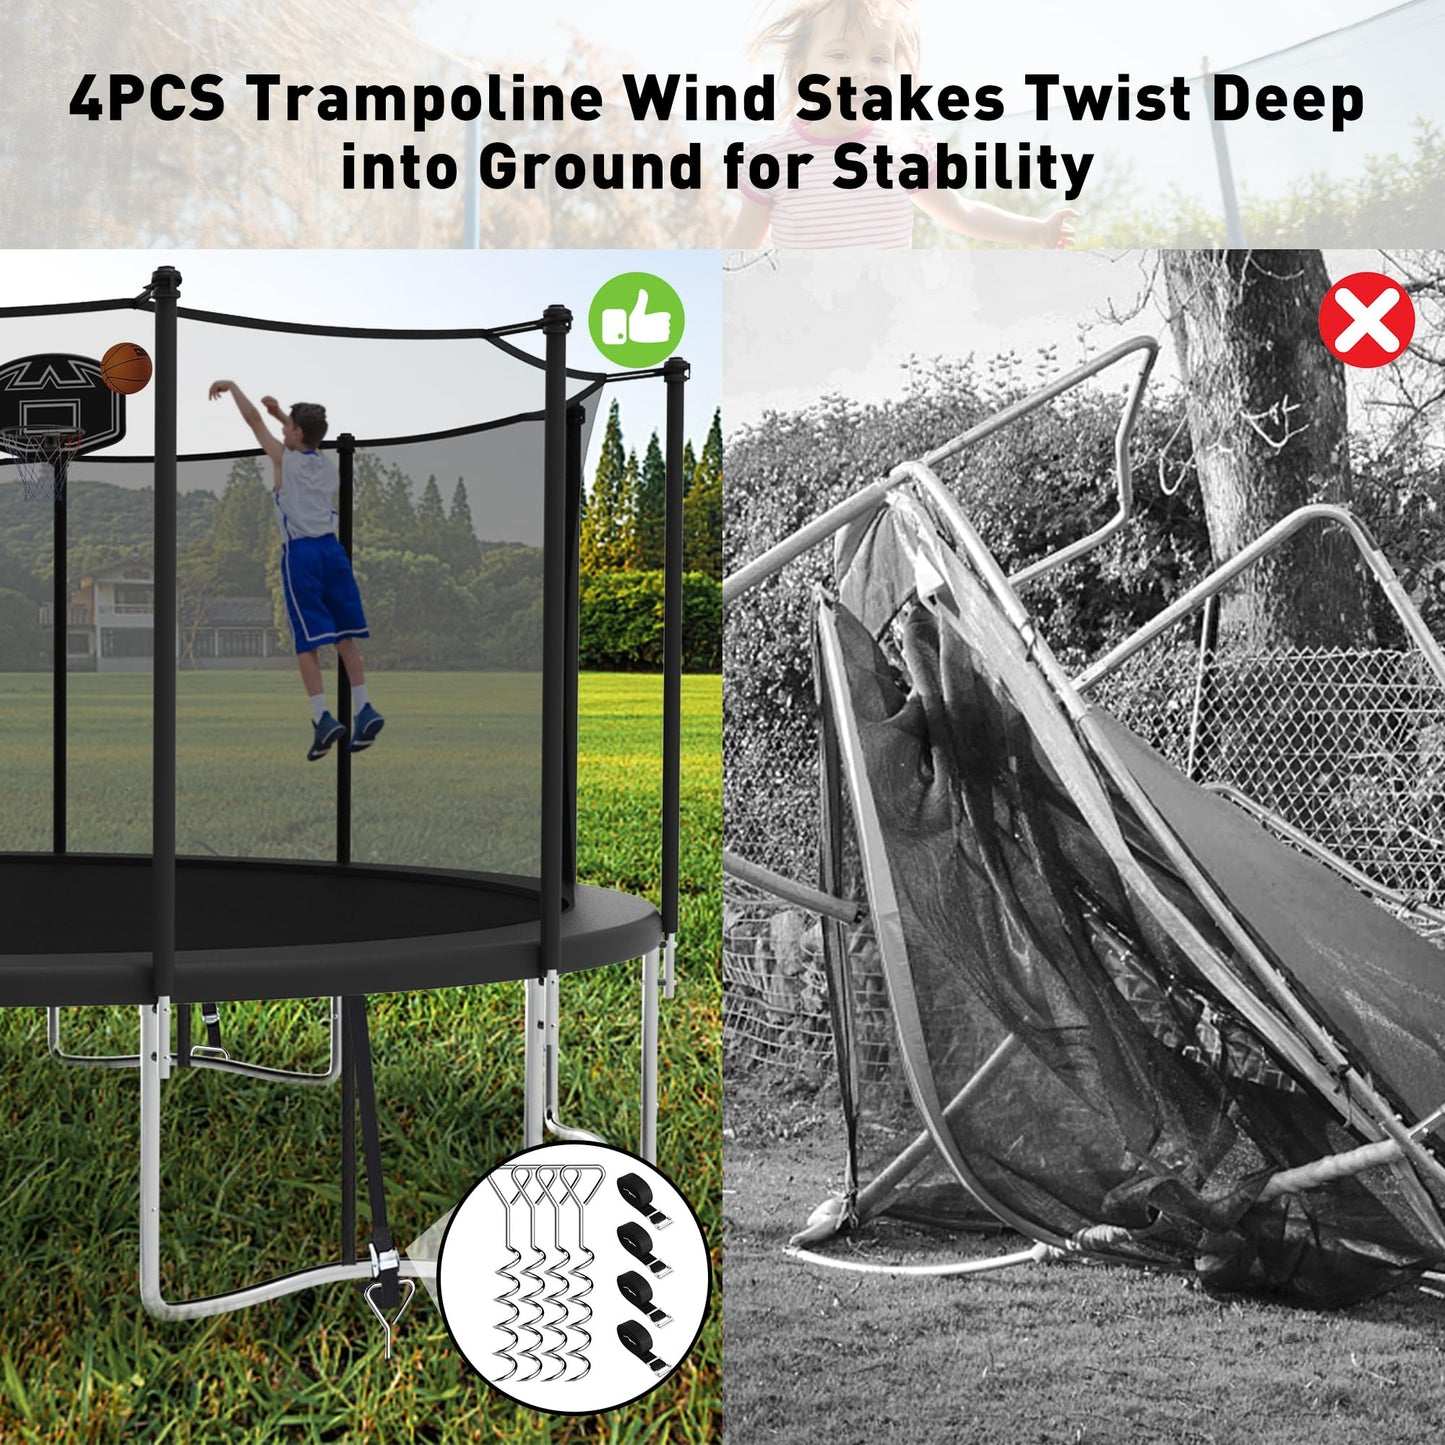 CITYLE 1500LBS 16FT Tranpoline for Kids and Adults Tranpoline with 6 Wind Stakes, Safety Enclosure Net, Basketball Hoop, Ball and Ladder, Heavy Duty Outdoor Recreational Tranpolines, Black